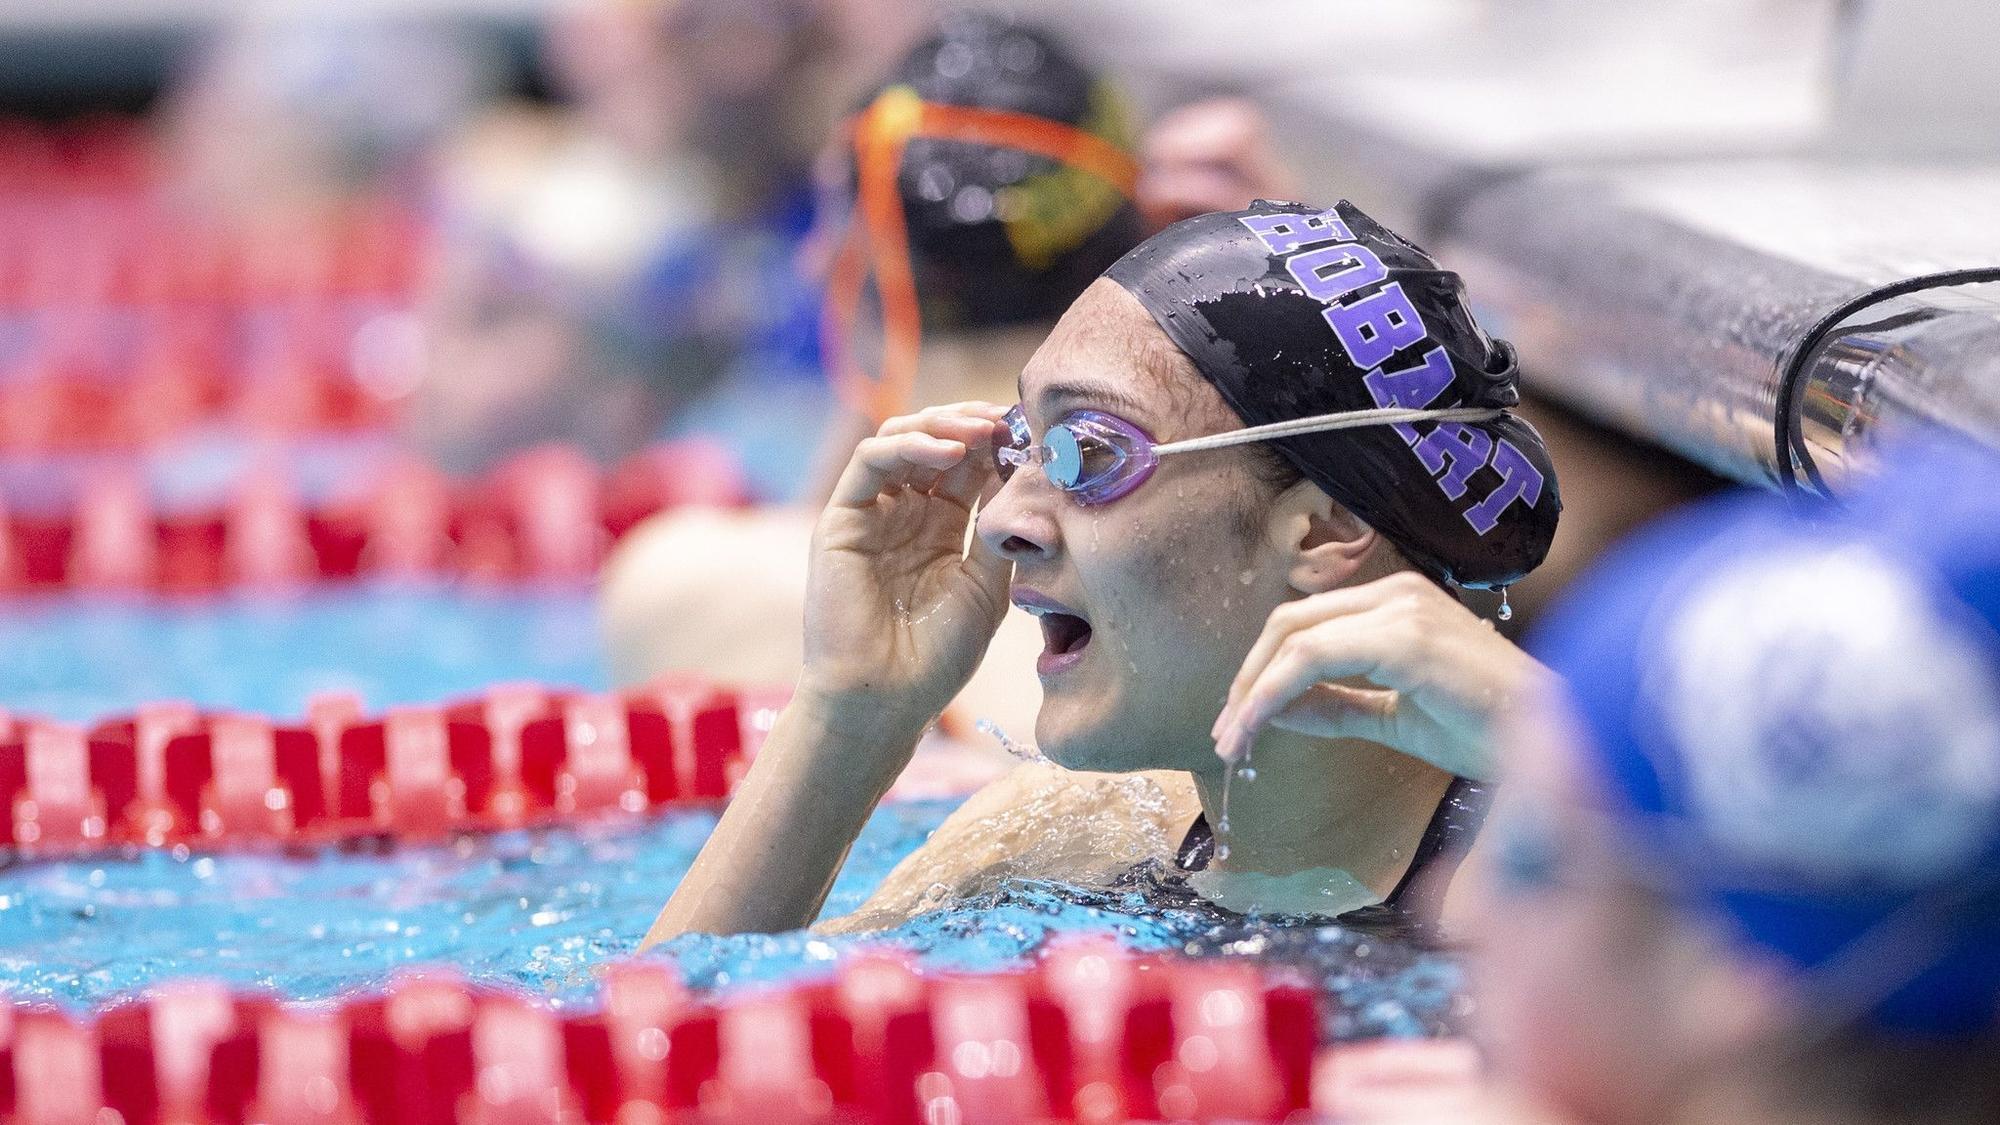 Time now for Wright: Hobart sophomore Emma Wright wins swimming program’s first state title